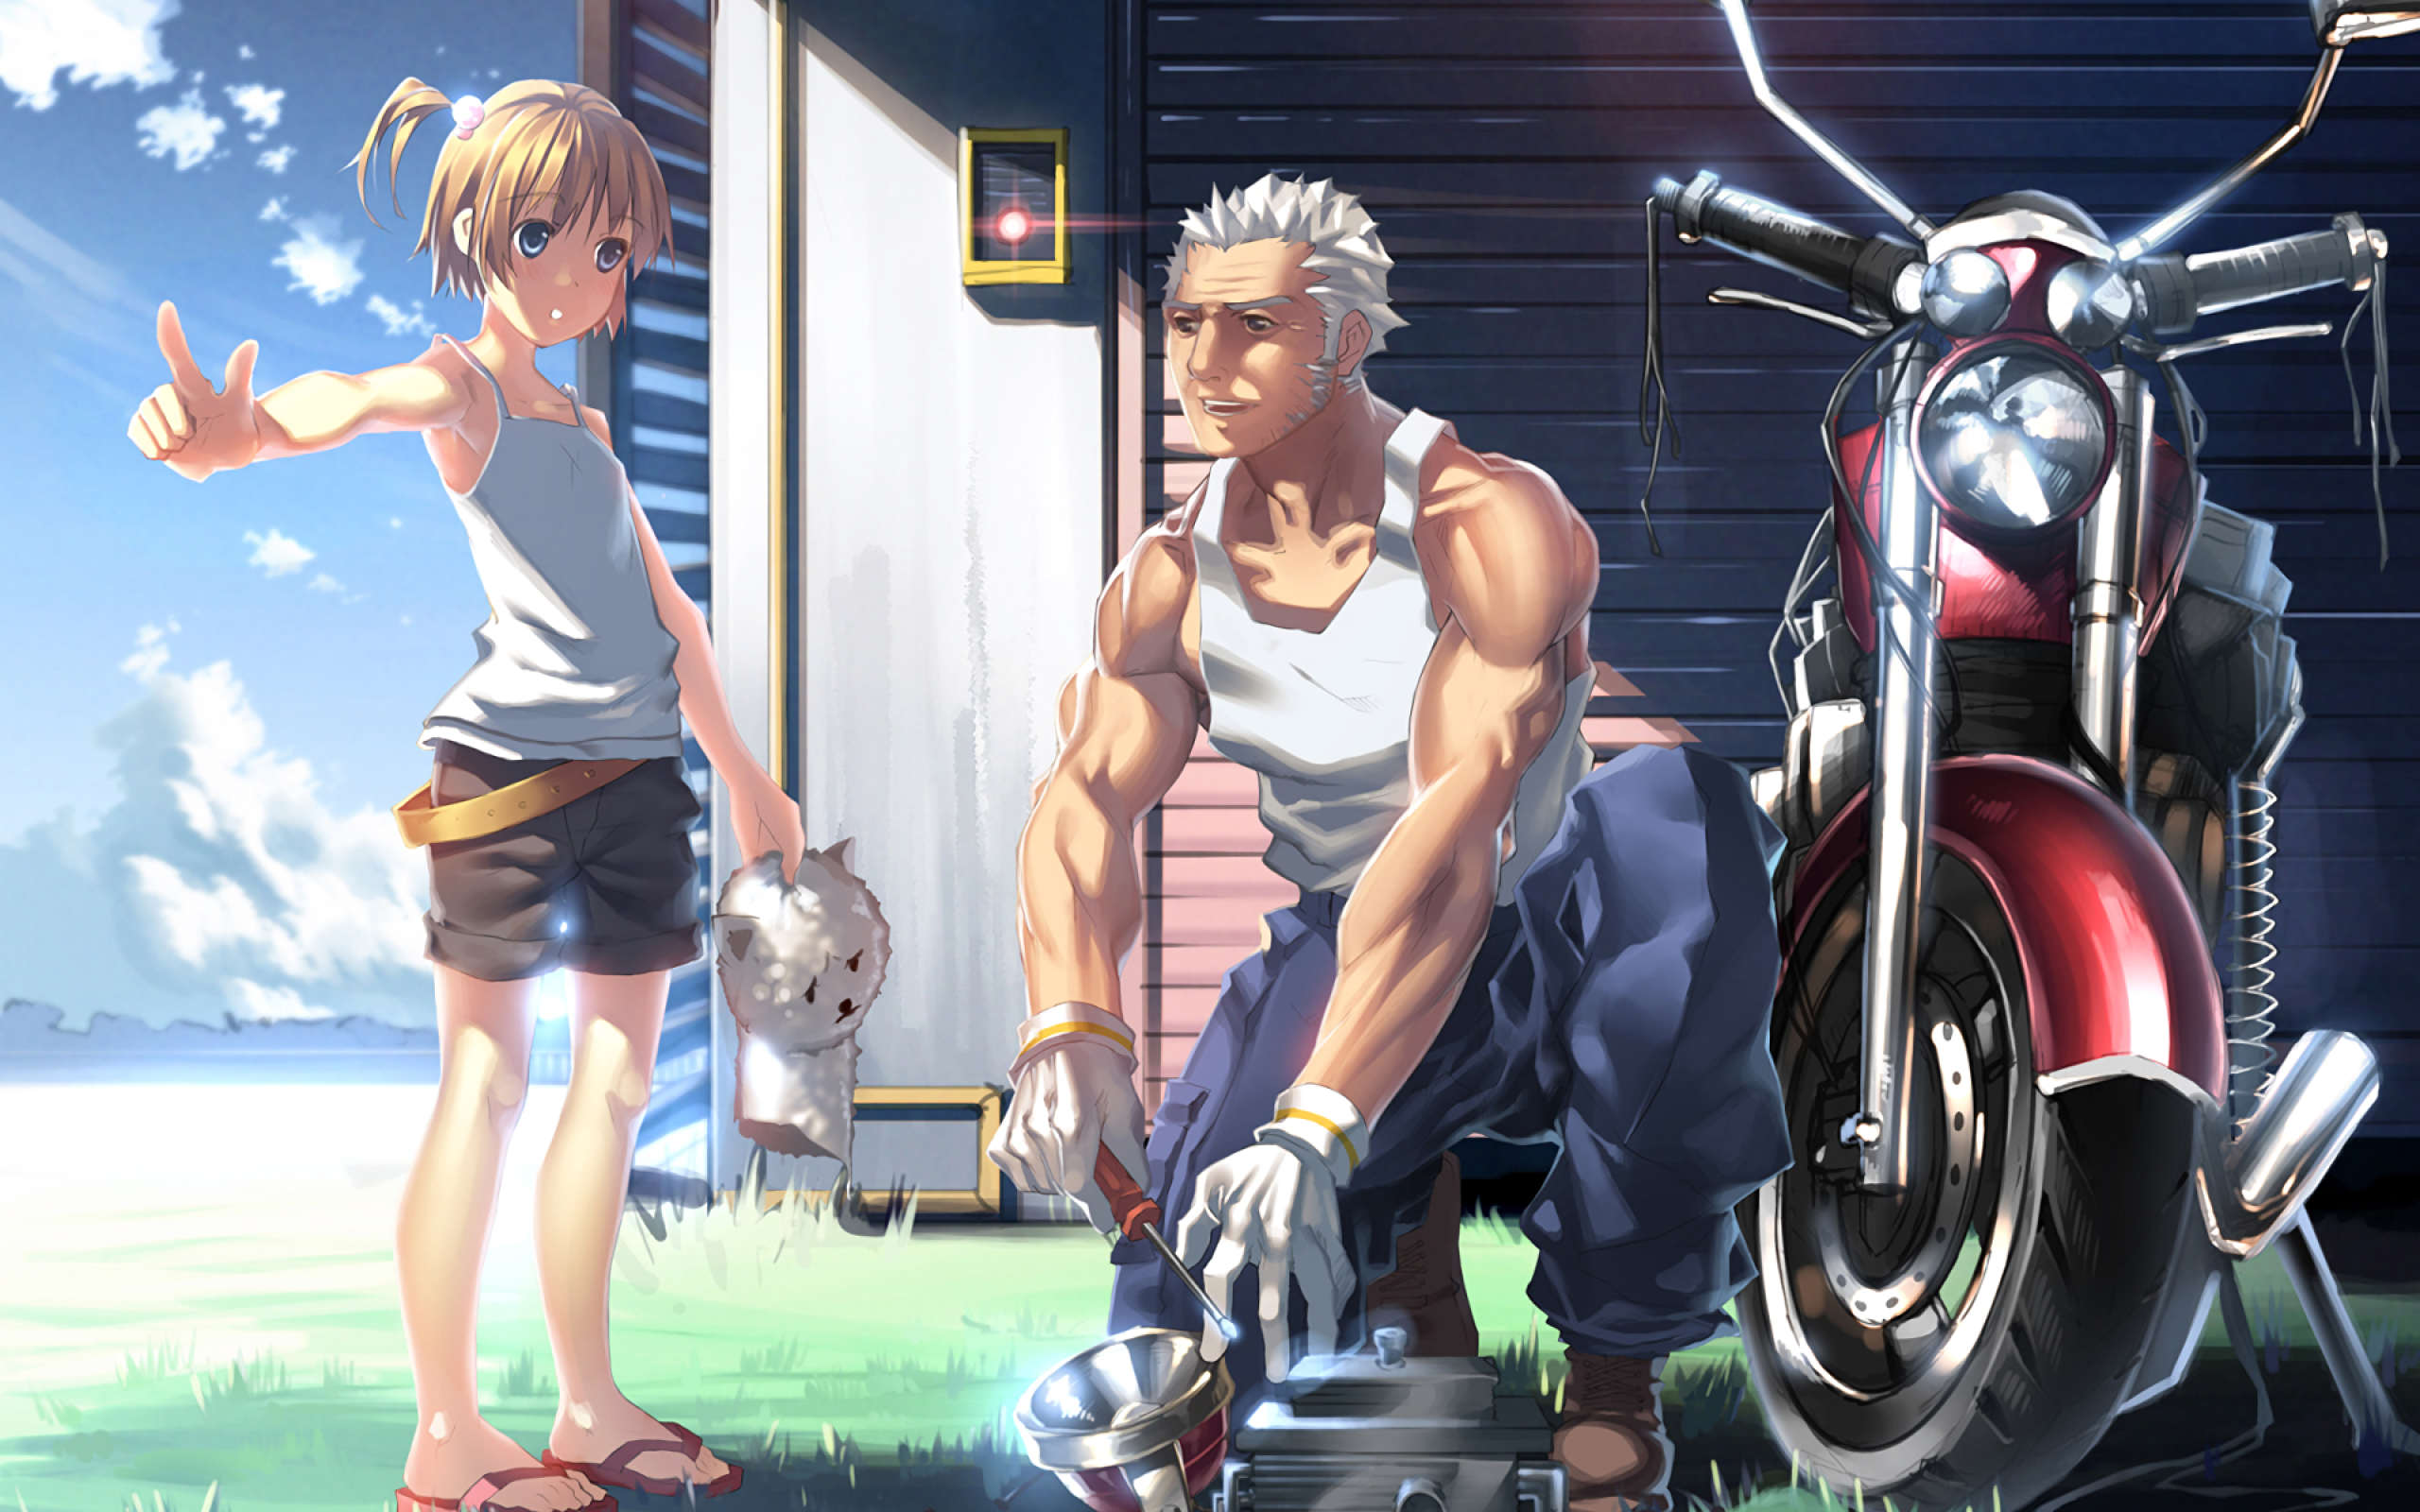 Download 2560x1600 Anime Girl, Father, Motorcycle, Sunshine